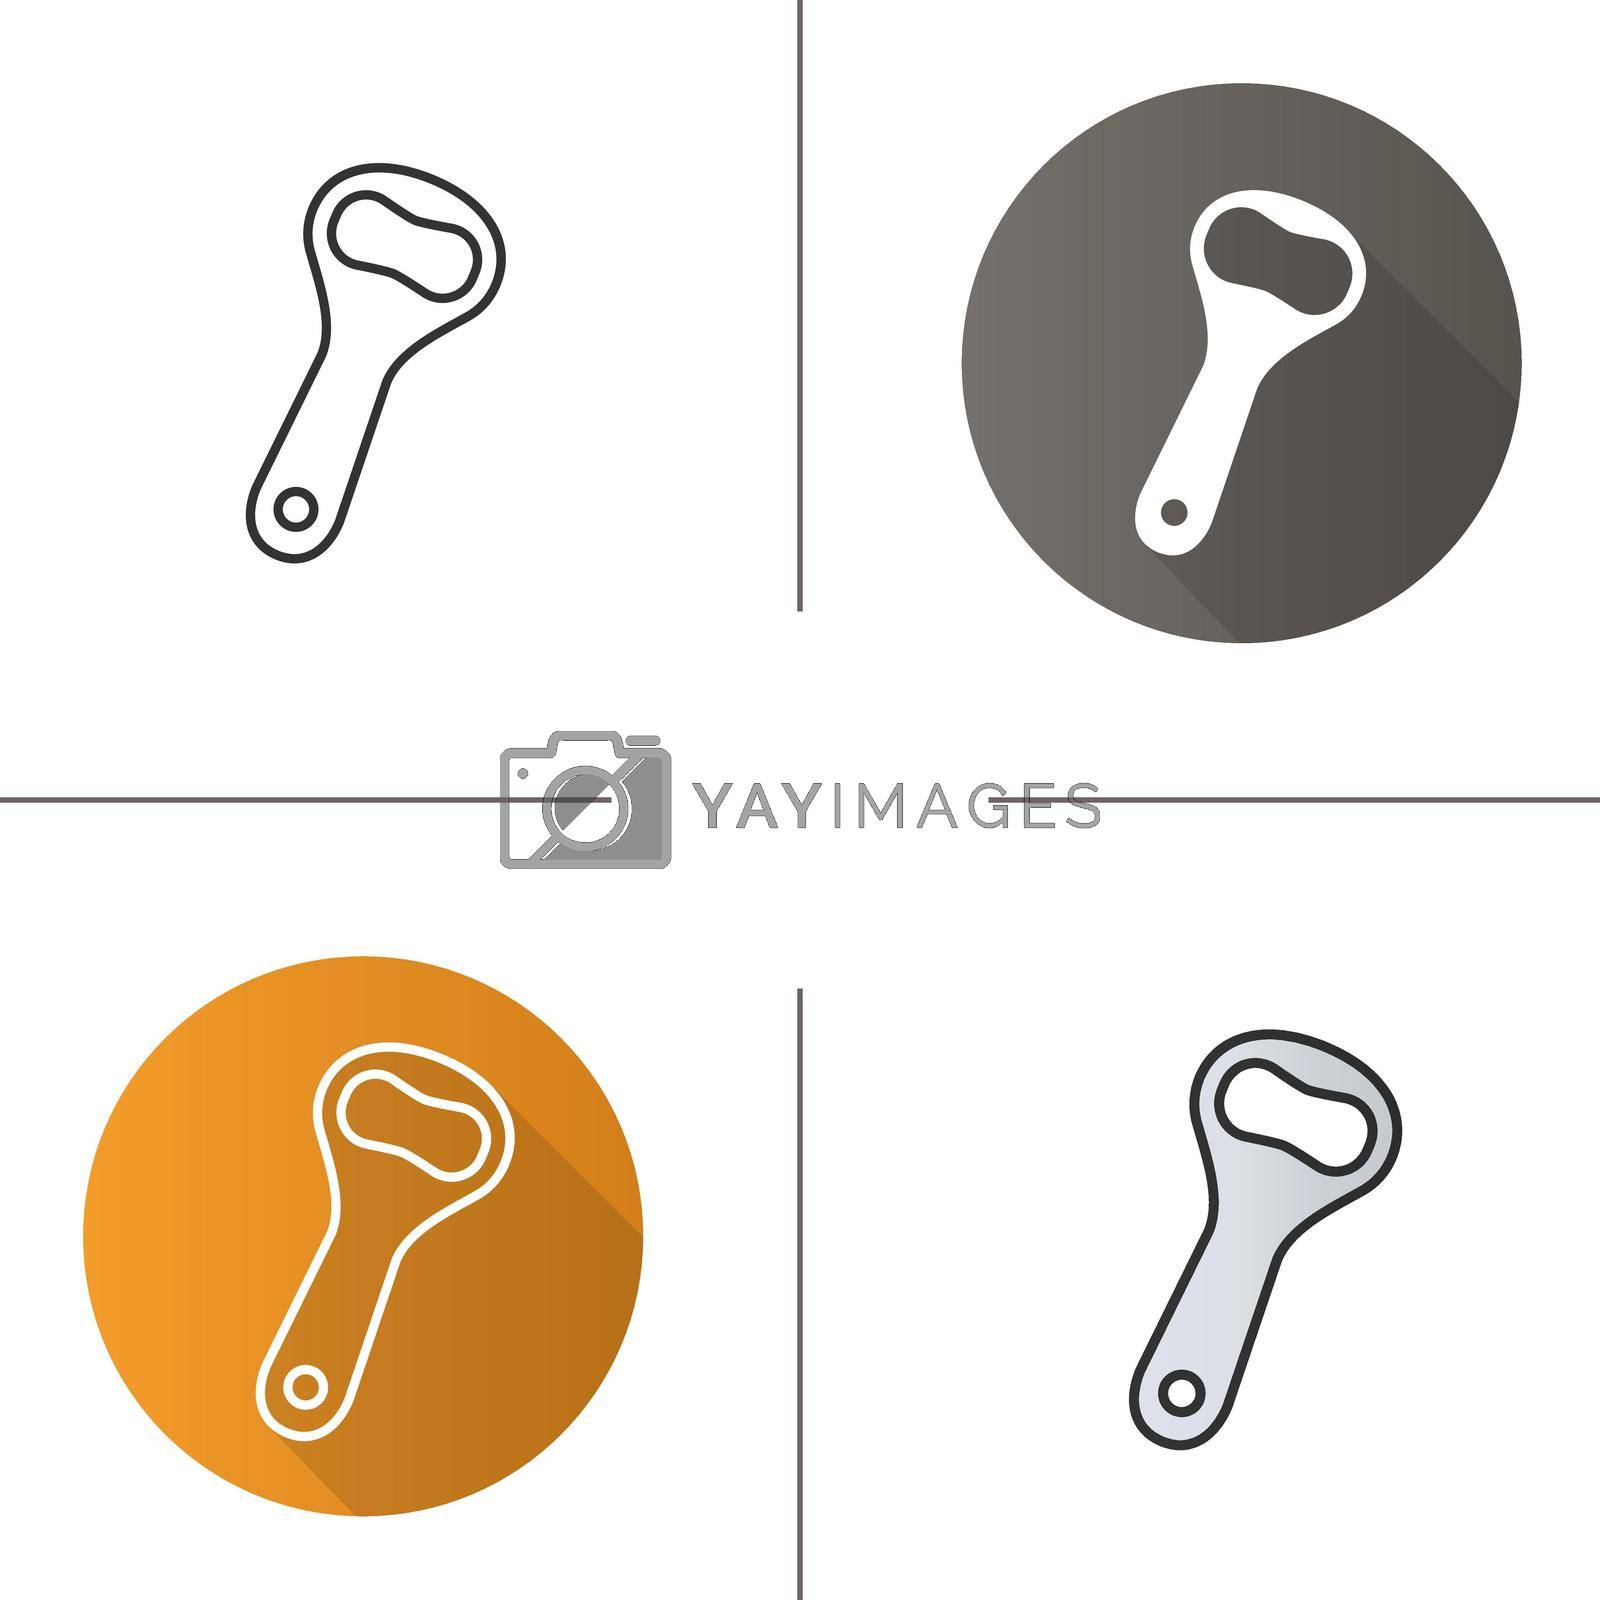 Royalty free image of Bottle opener icon by bsd